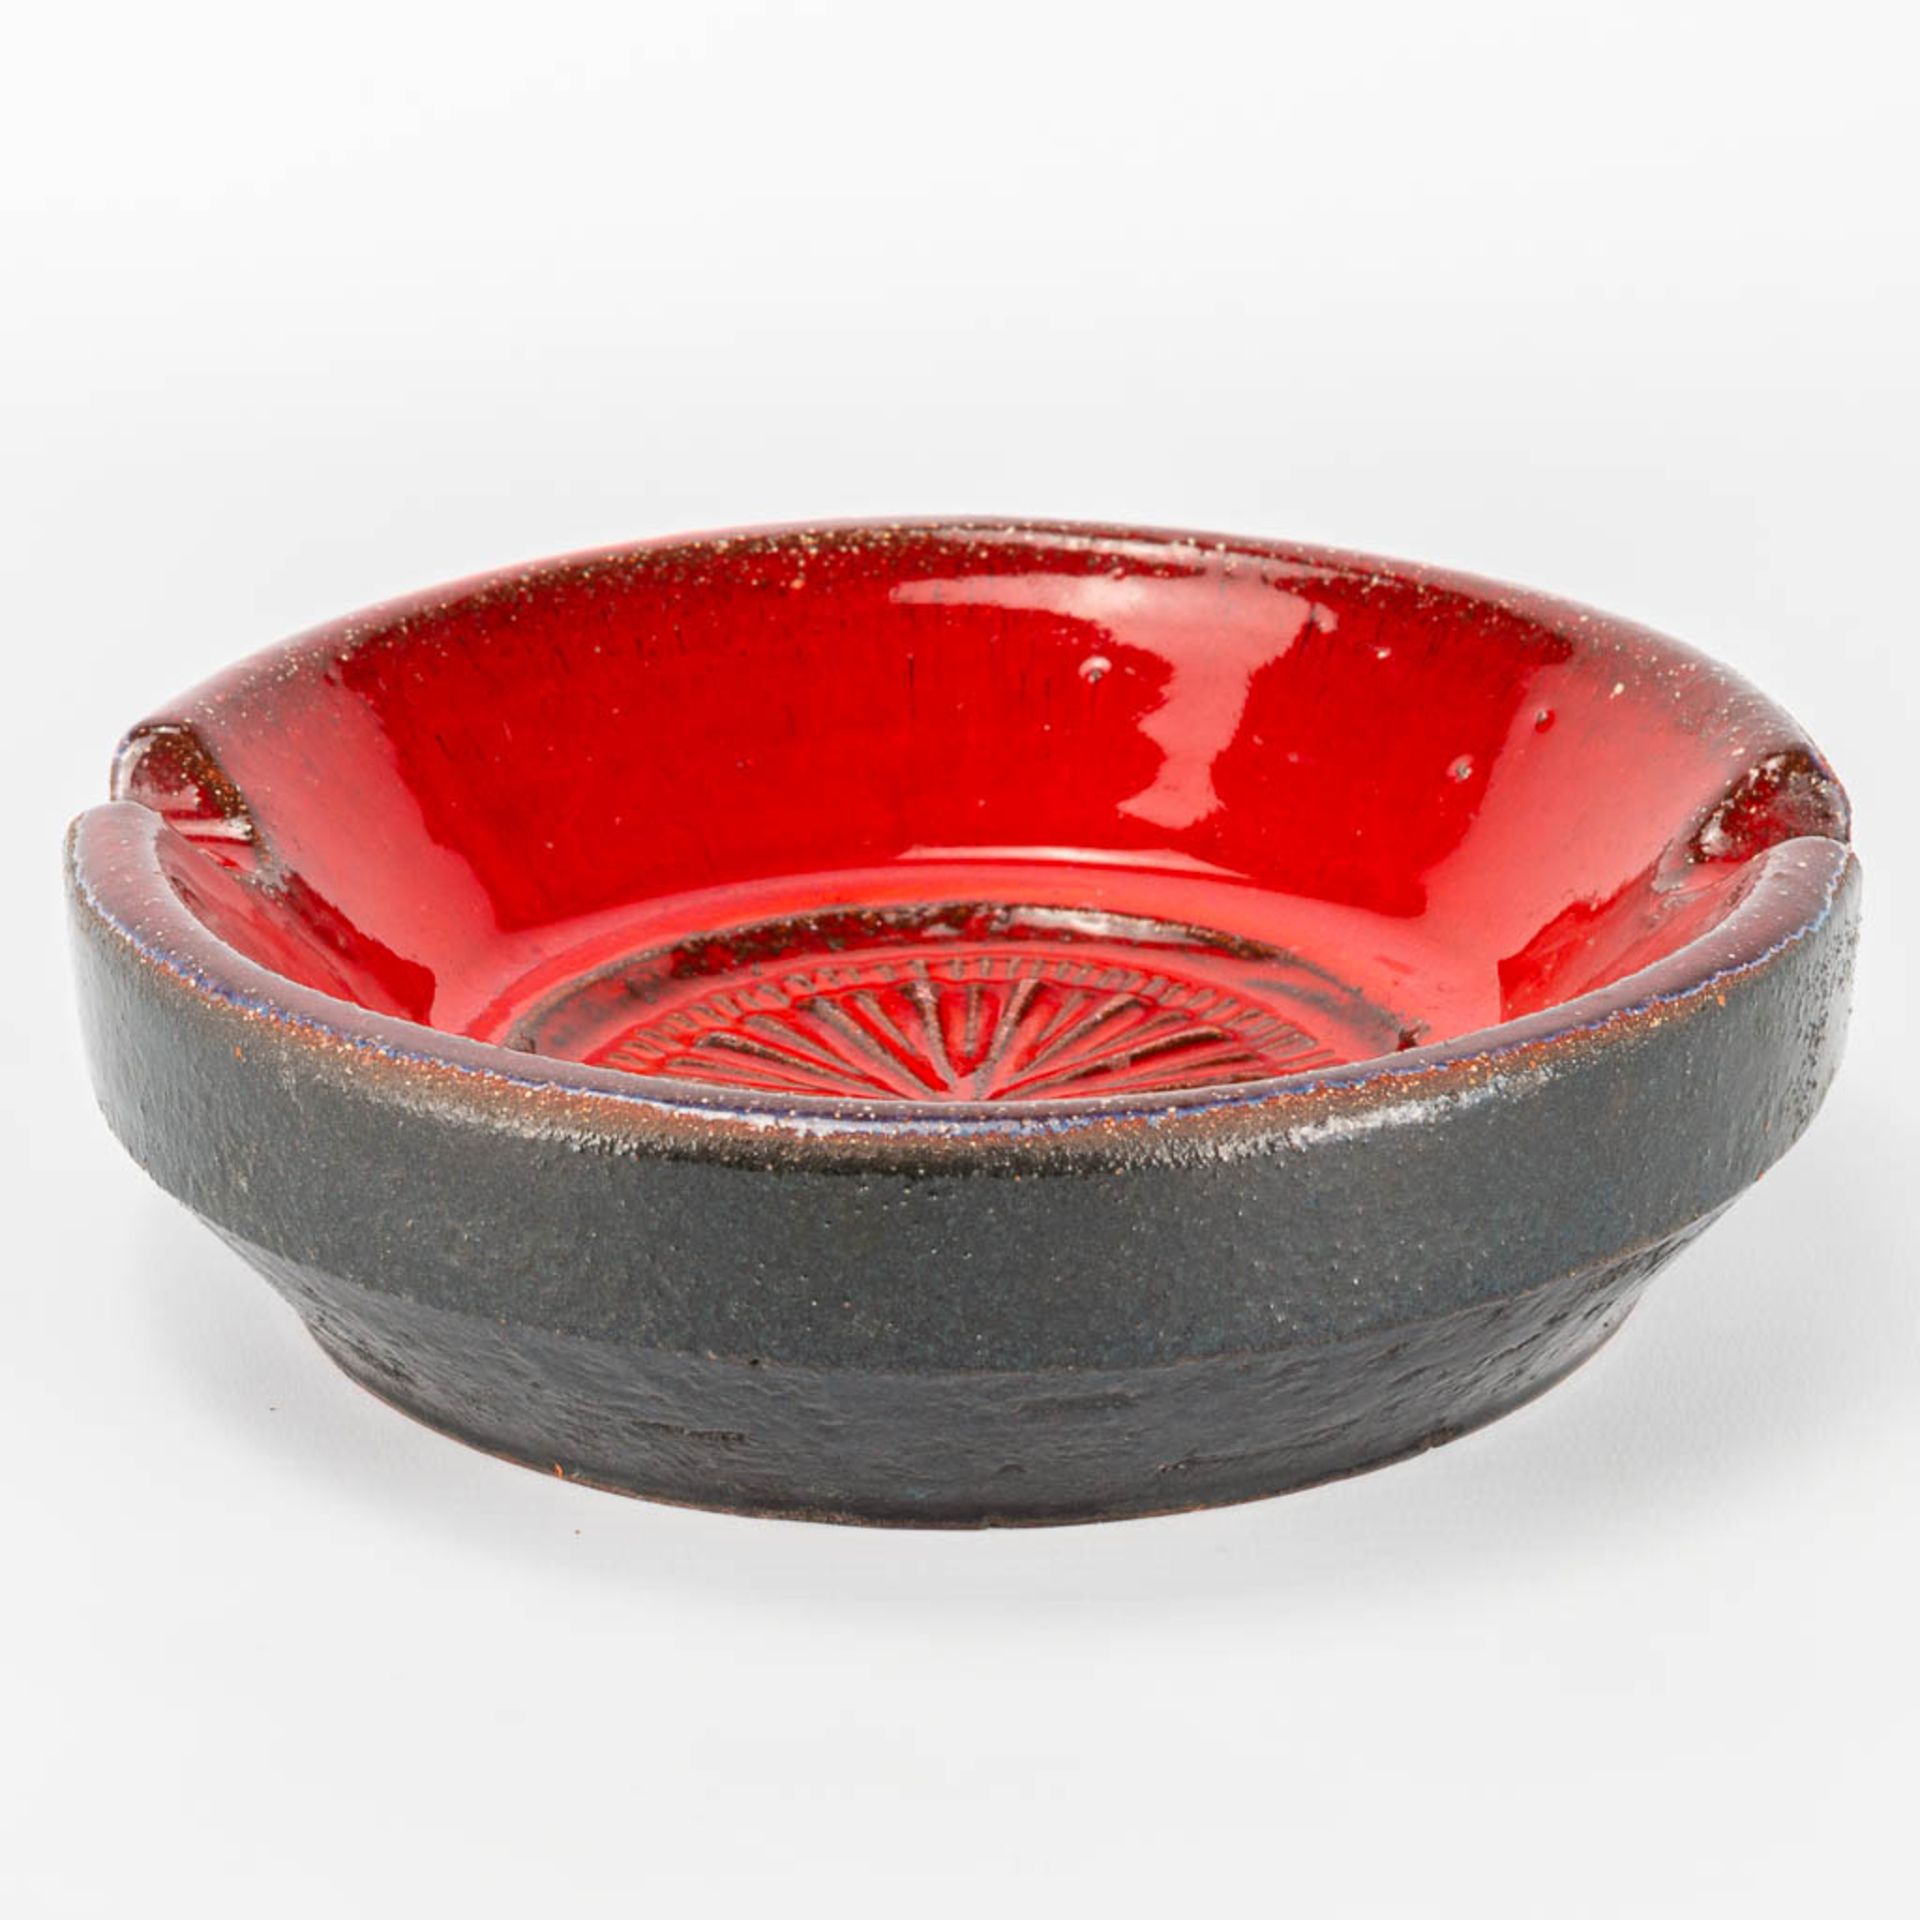 Rogier VANDEWEGHE (1923-2020) A collection of 2 ashtrays made of red glazed ceramics for Amphora. Ma - Image 5 of 19